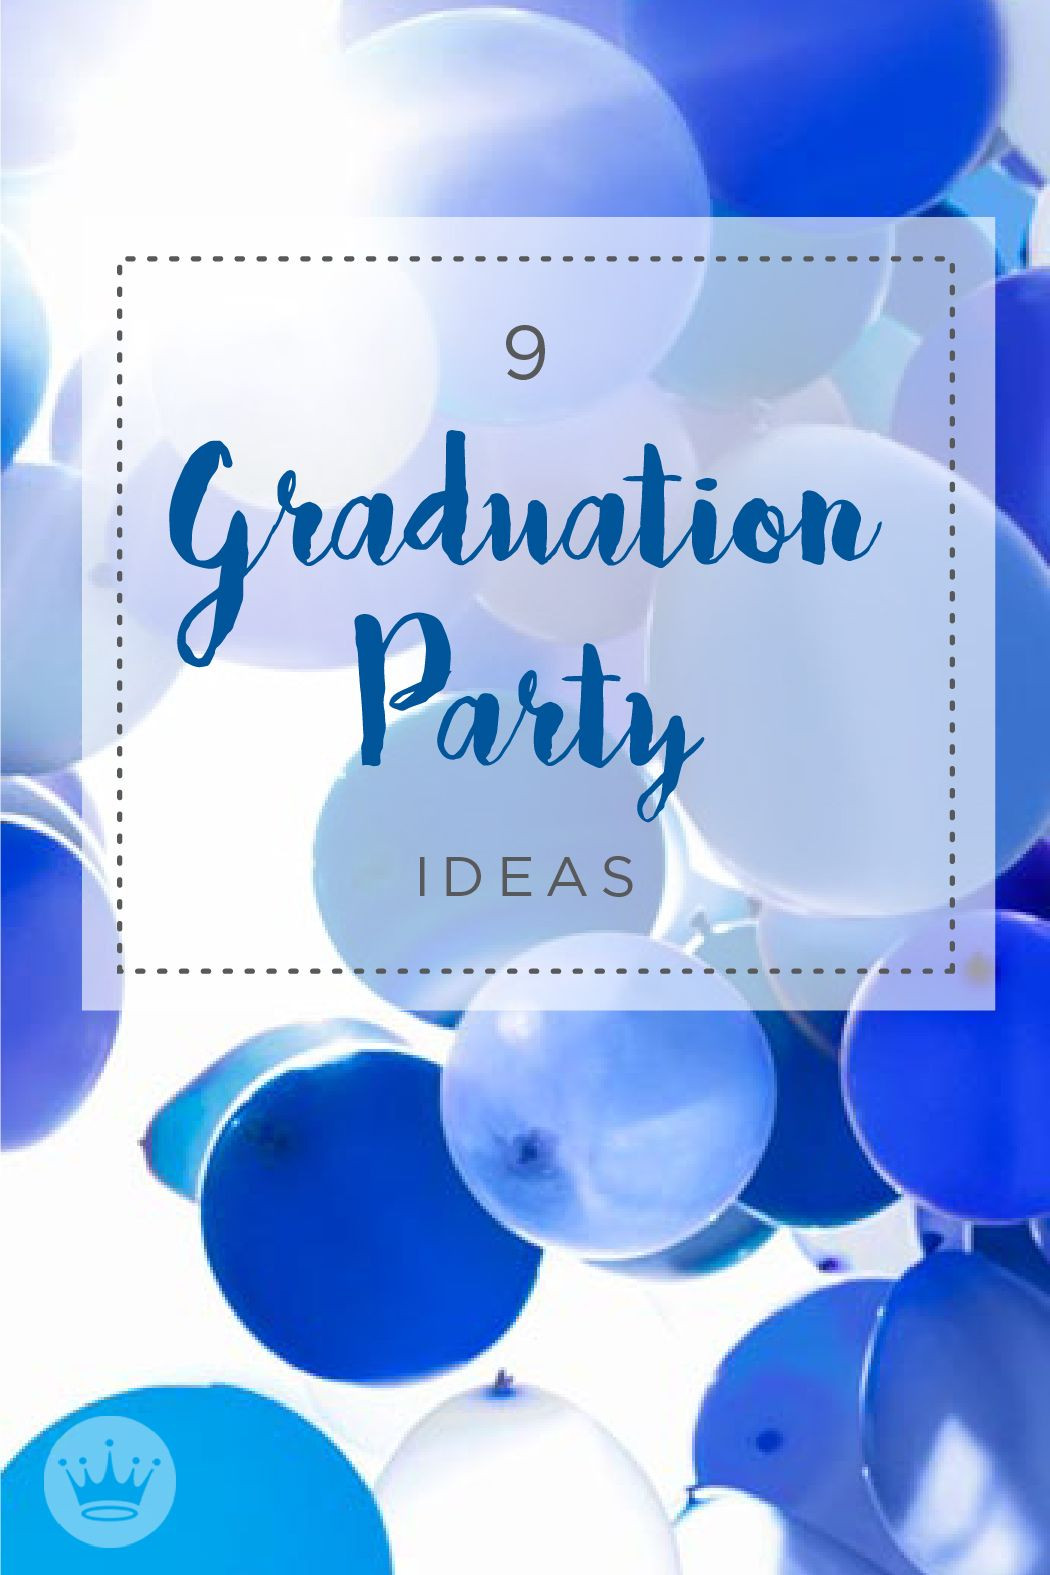 Entertainment Ideas For Graduation Party
 Cap off the grad’s big day with these fun graduation party